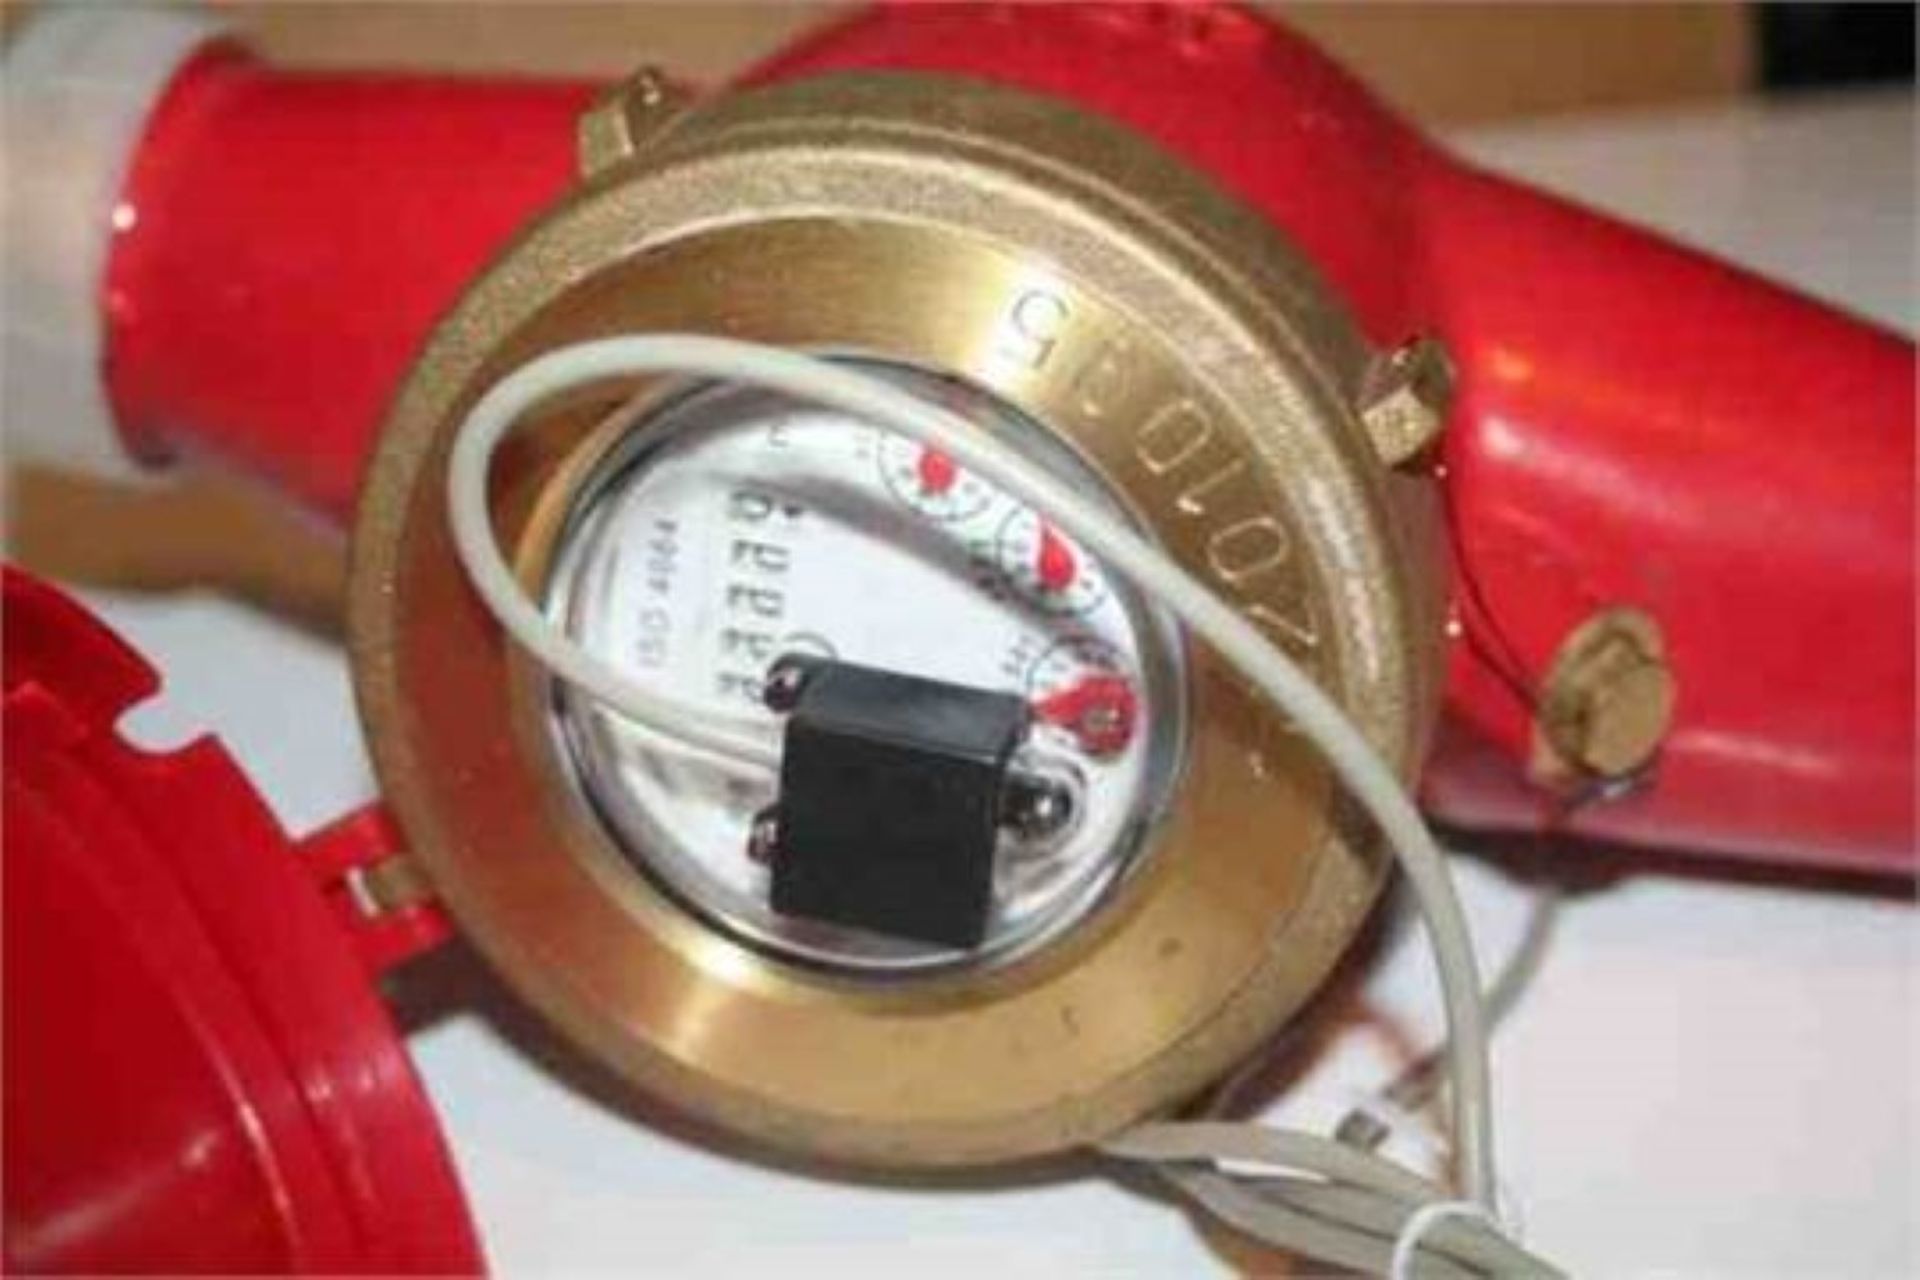 1 x Multi-Jet Dry Type Vane Wheel Hot Water Meters (90°C Max) complete with Pulse Output As Standard - Image 4 of 4